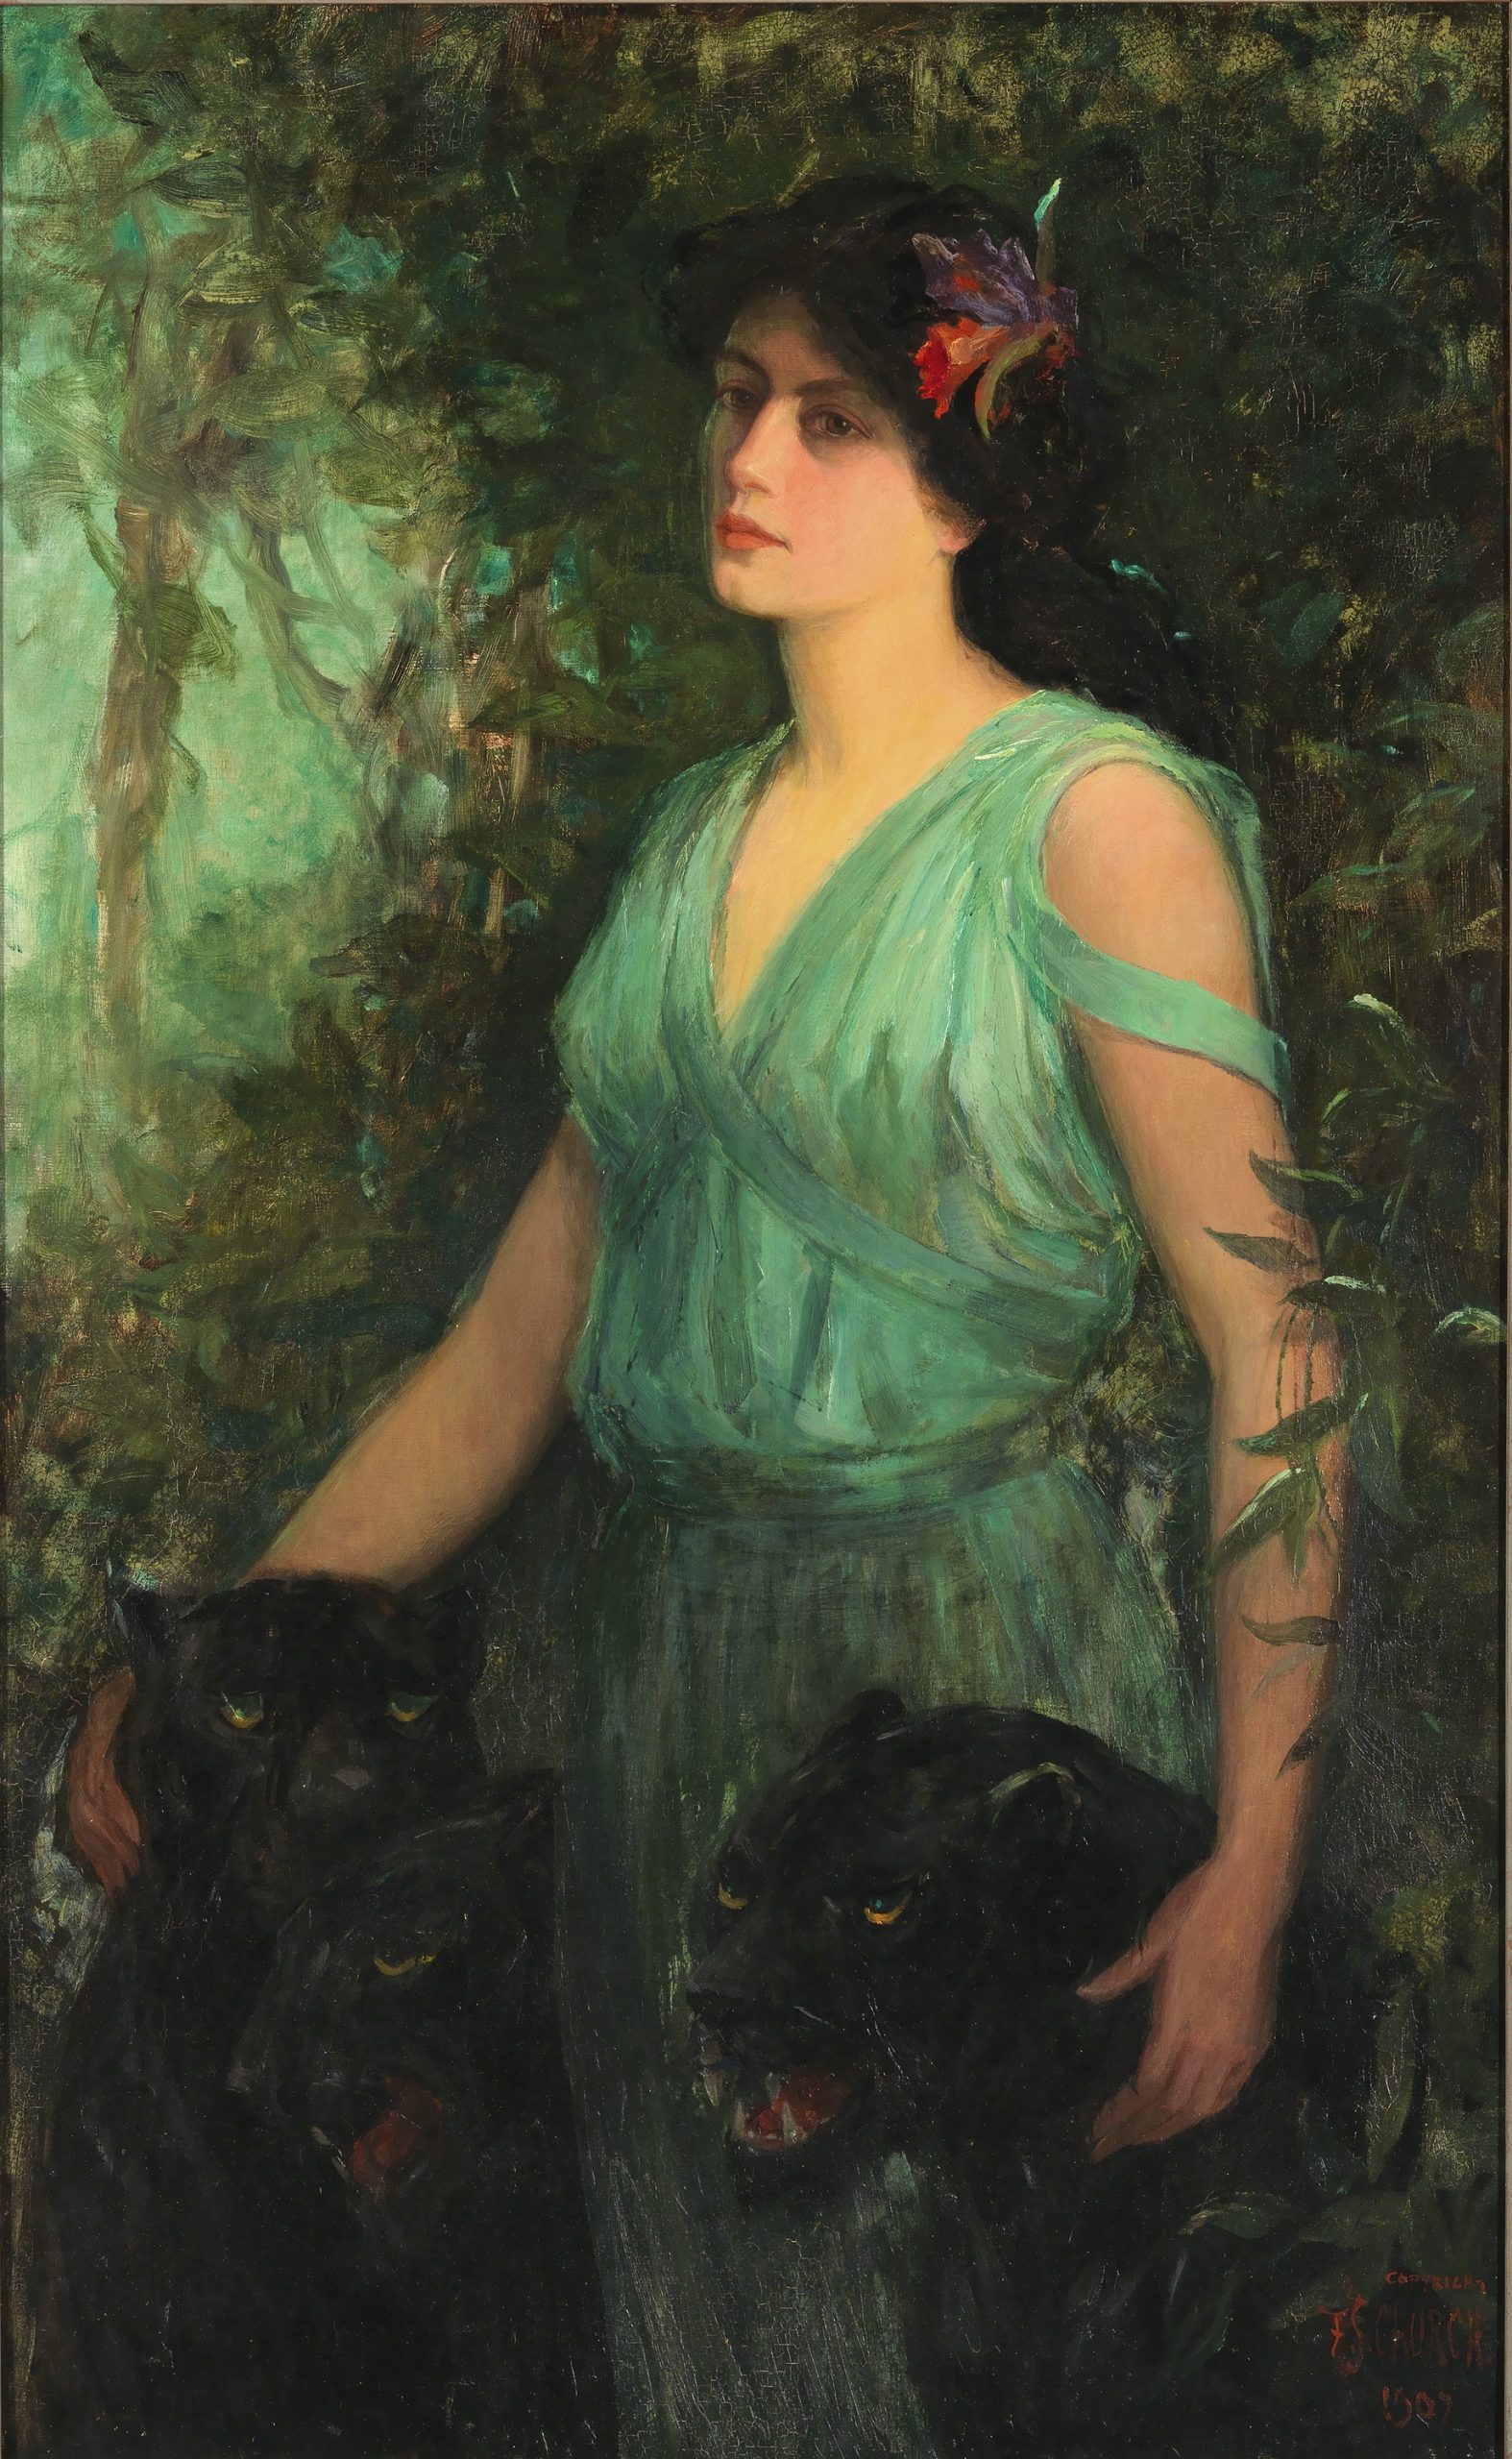 A portrait of a woman standing against the backdrop of a dark and leafy forest with two tigers by her sides.